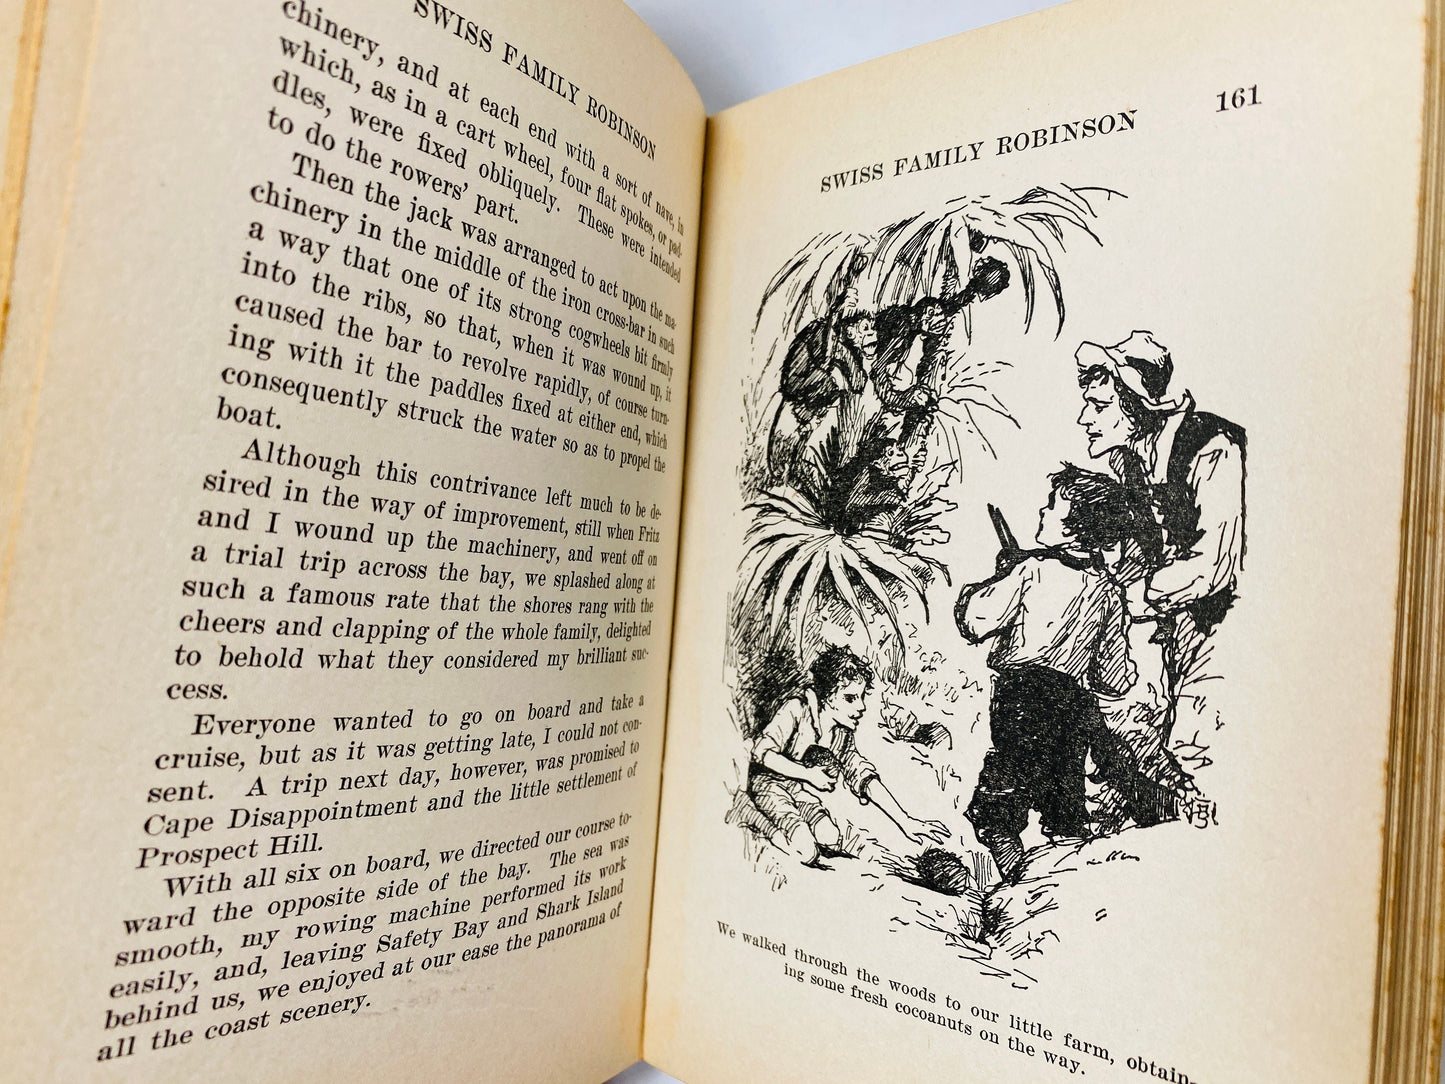 1924 Swiss Family Robinson vintage book by Johann David Wyss about a family who flee Napoleon and ends up shipwrecked on a deserted island